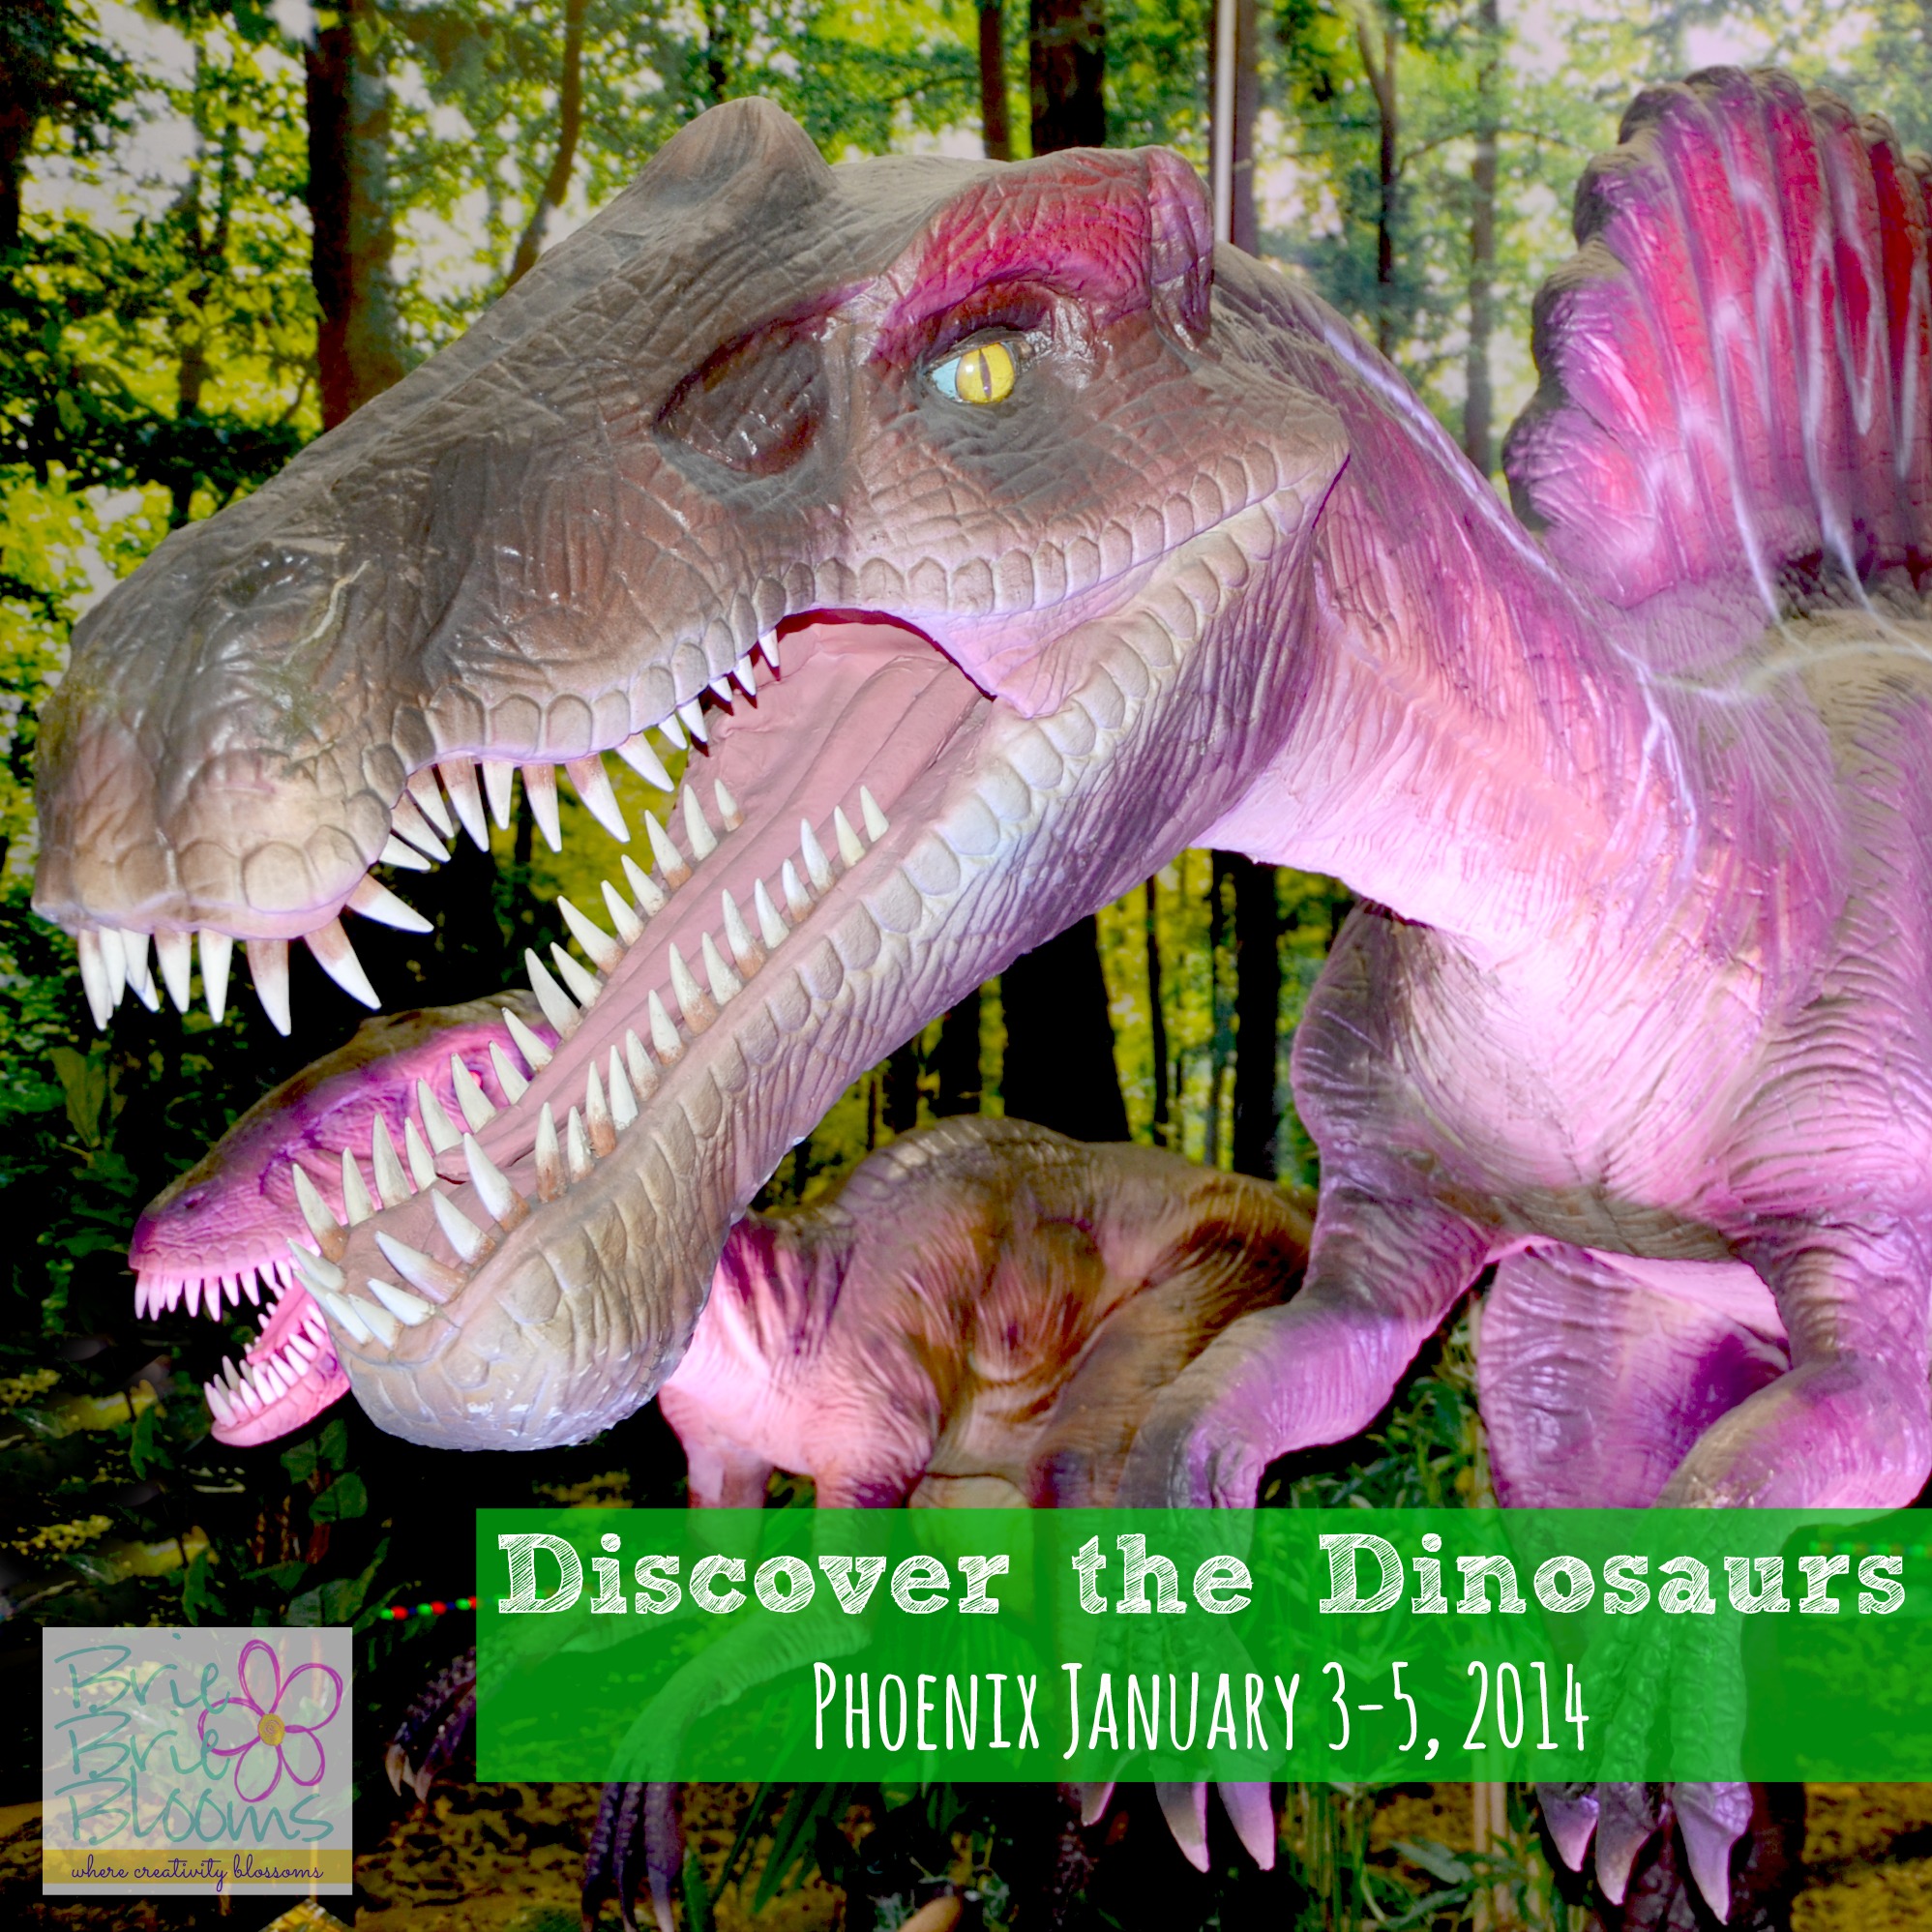 Discover the Dinosaurs in Phoenix January 3-5, 2014